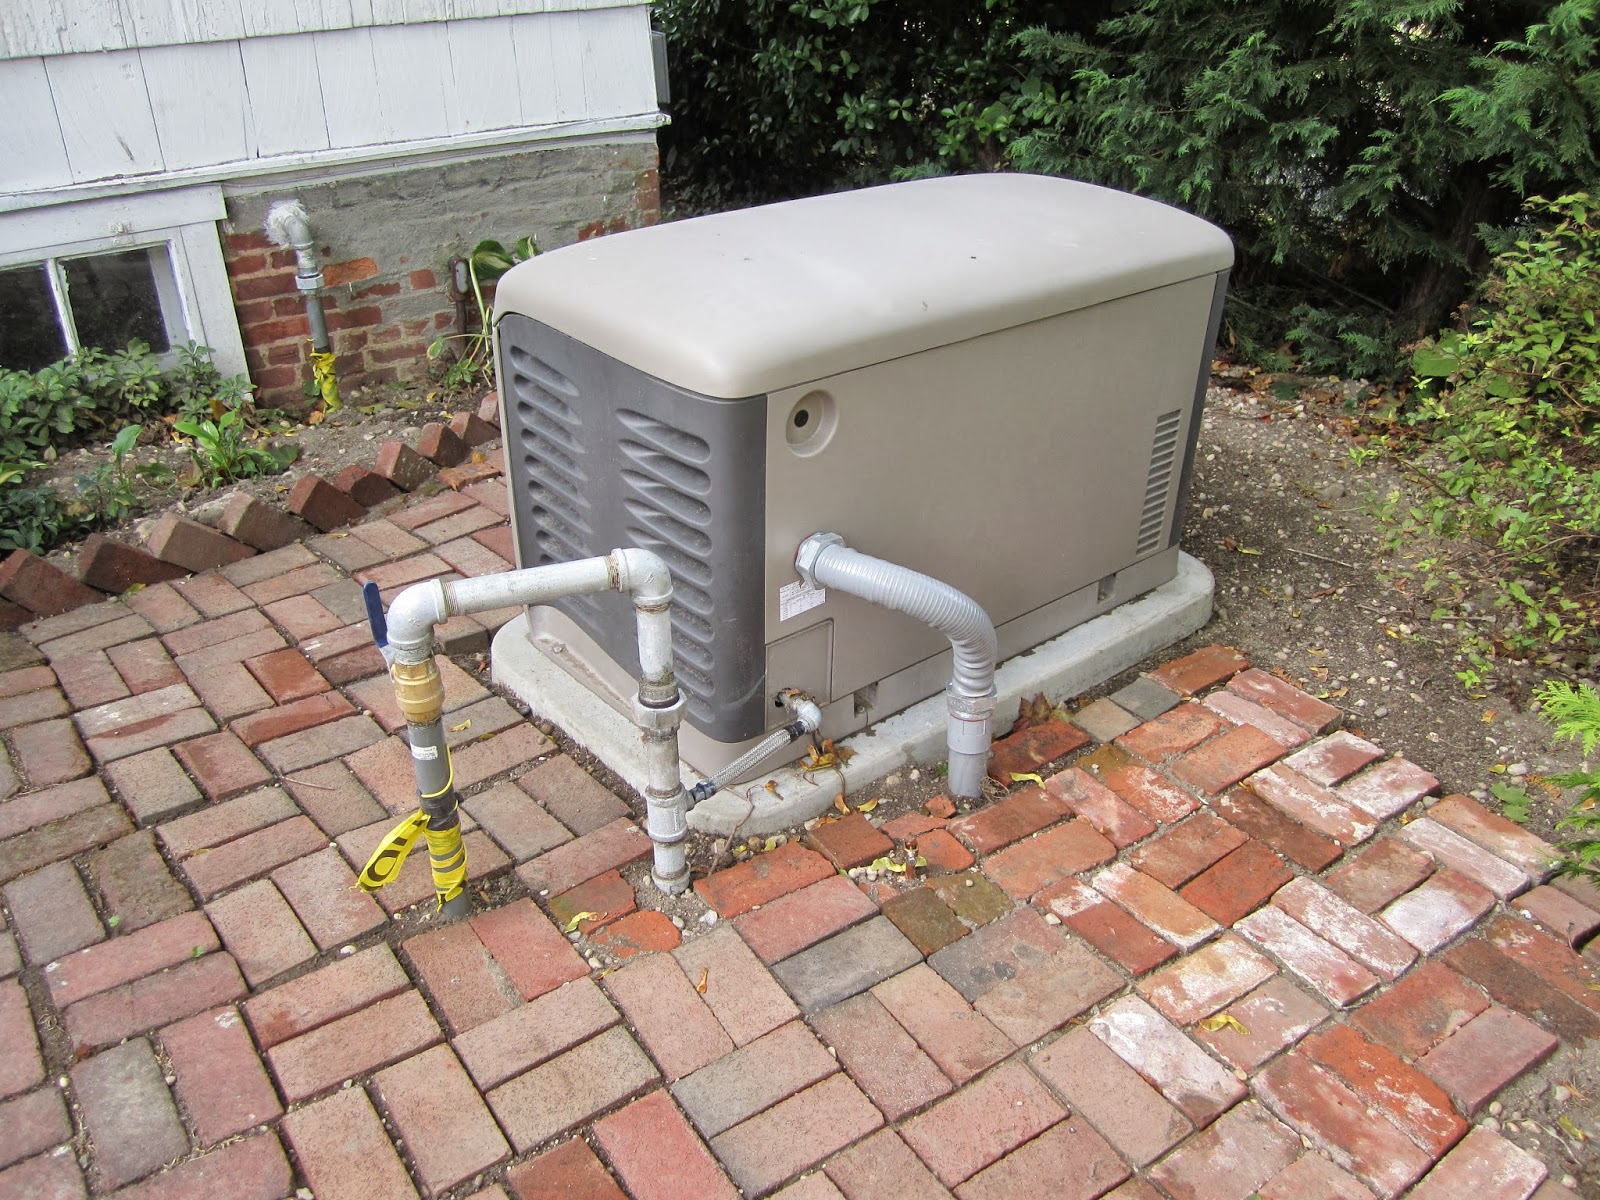 How to Install Natural Gas Line to a Generator?